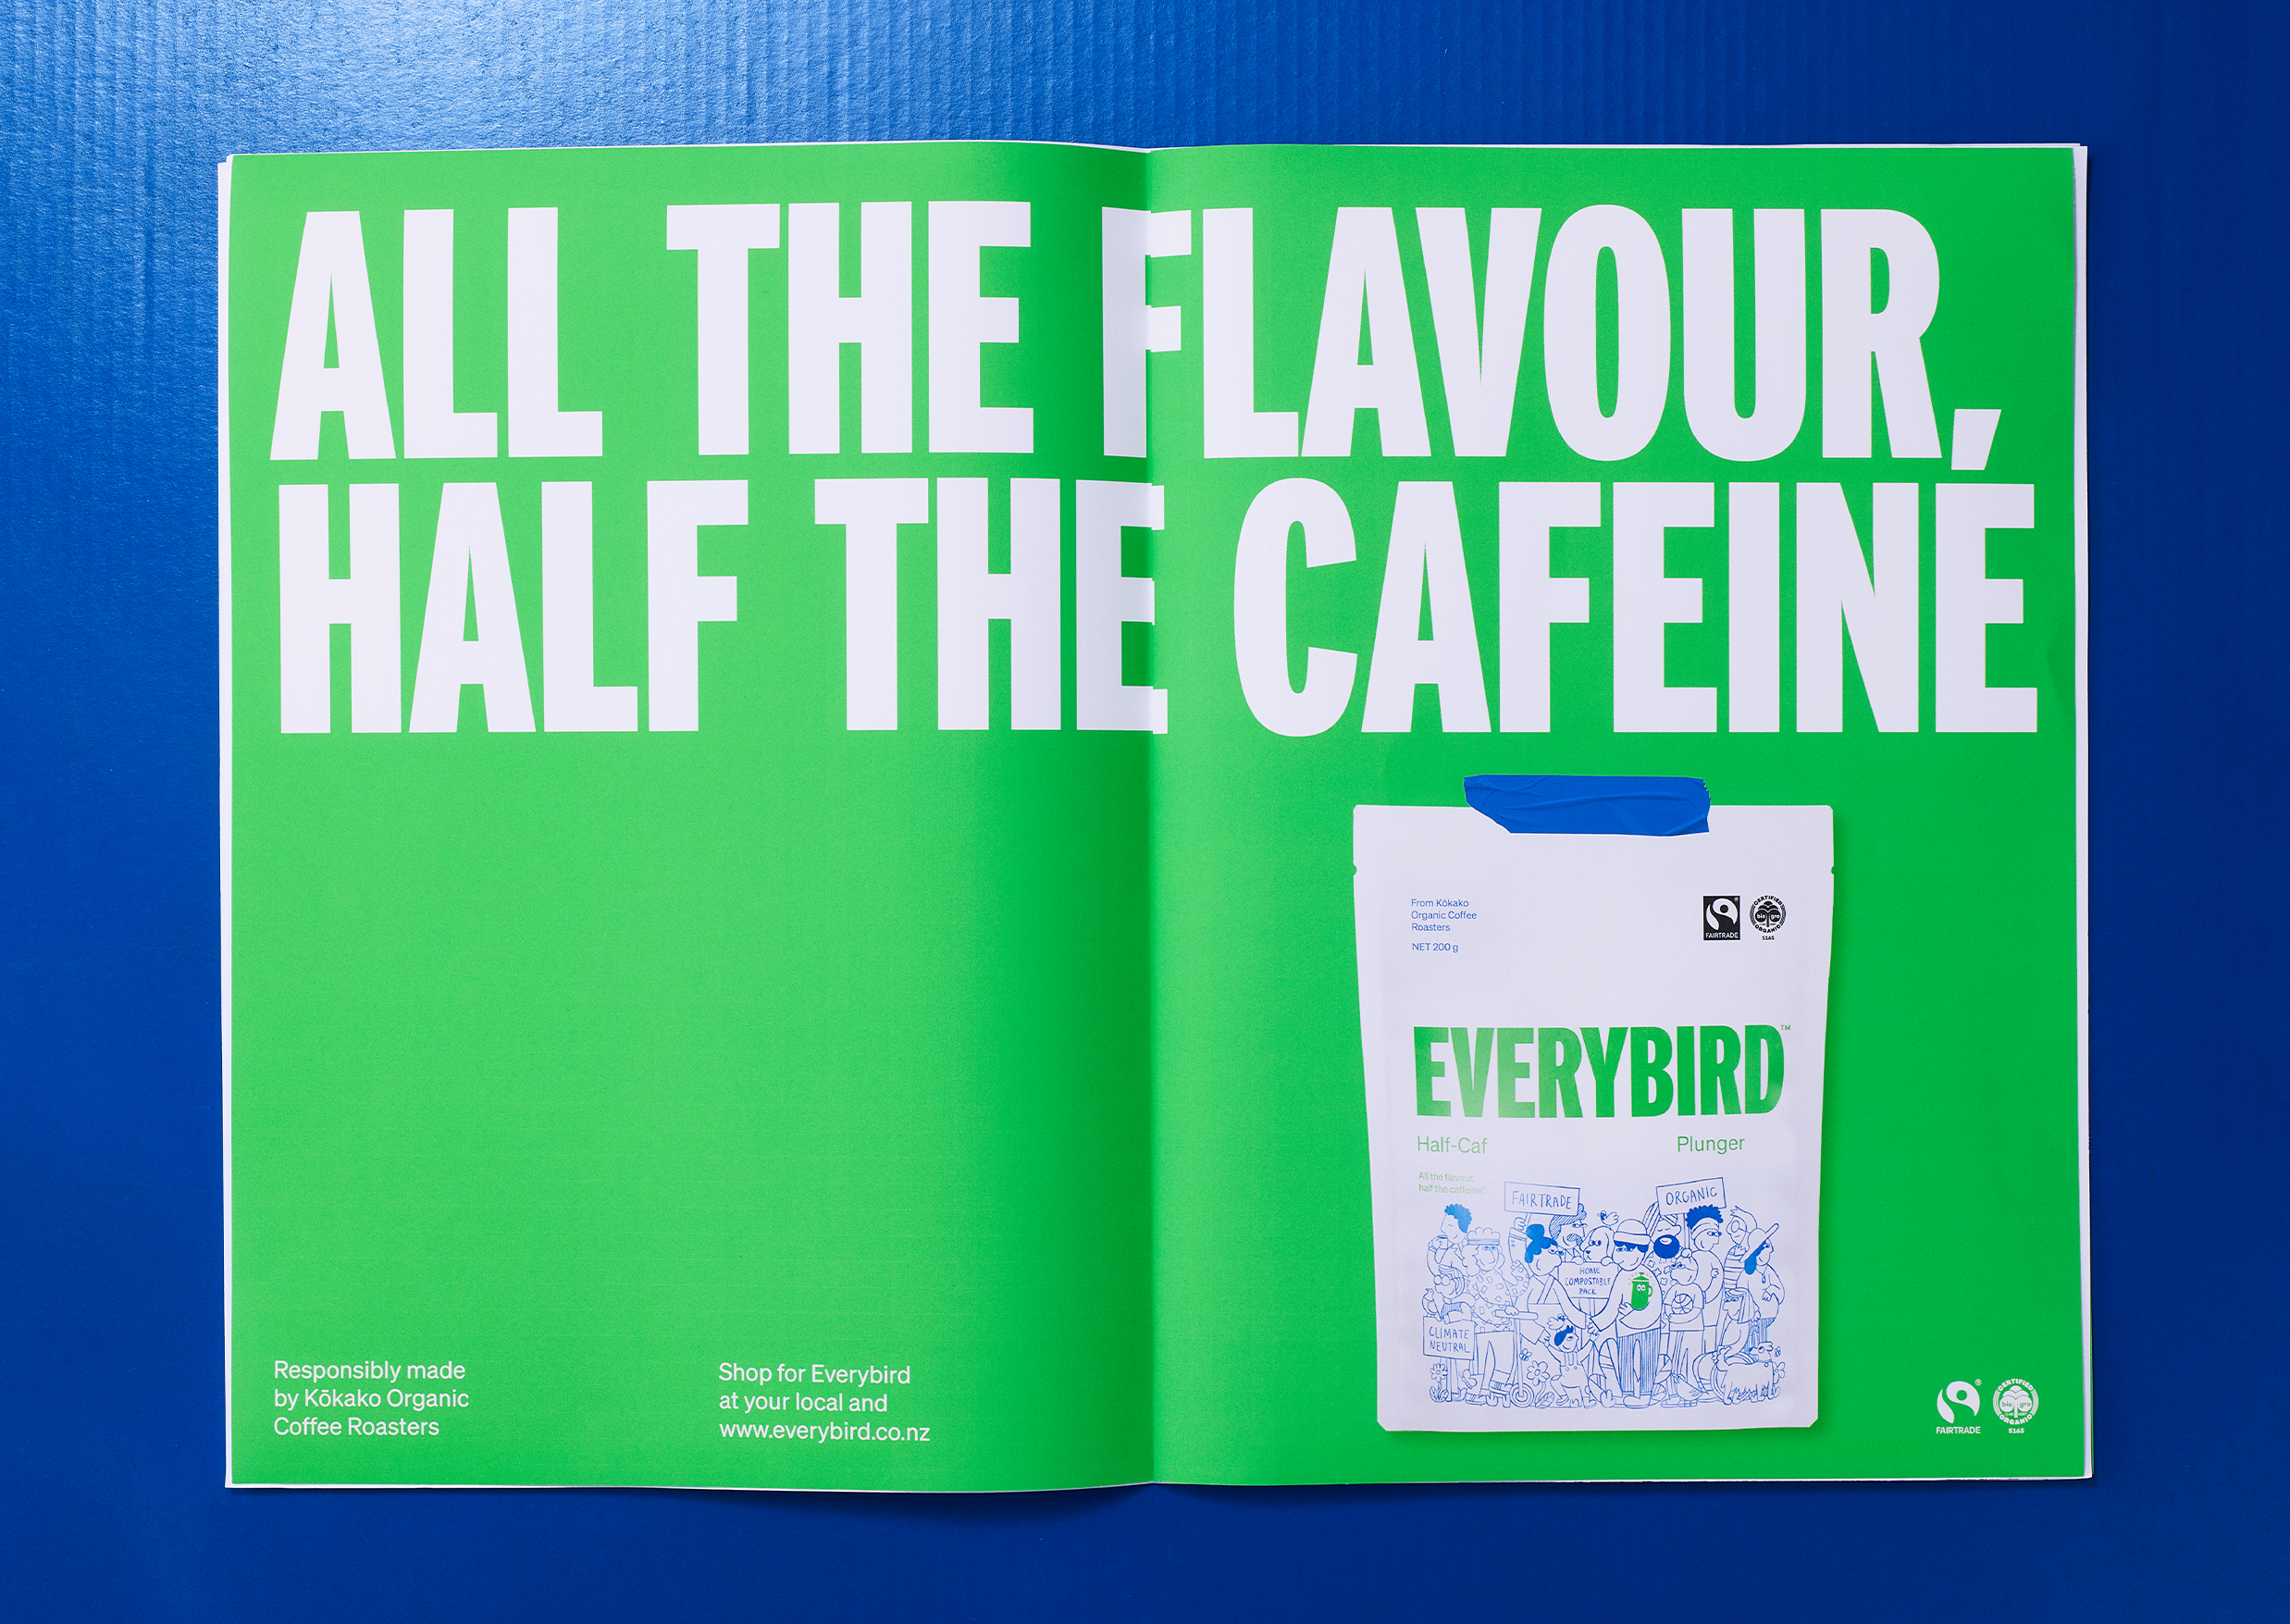 Branding and newsprint adverting by Marx Design for ethical New Zealand coffee brand Everybird